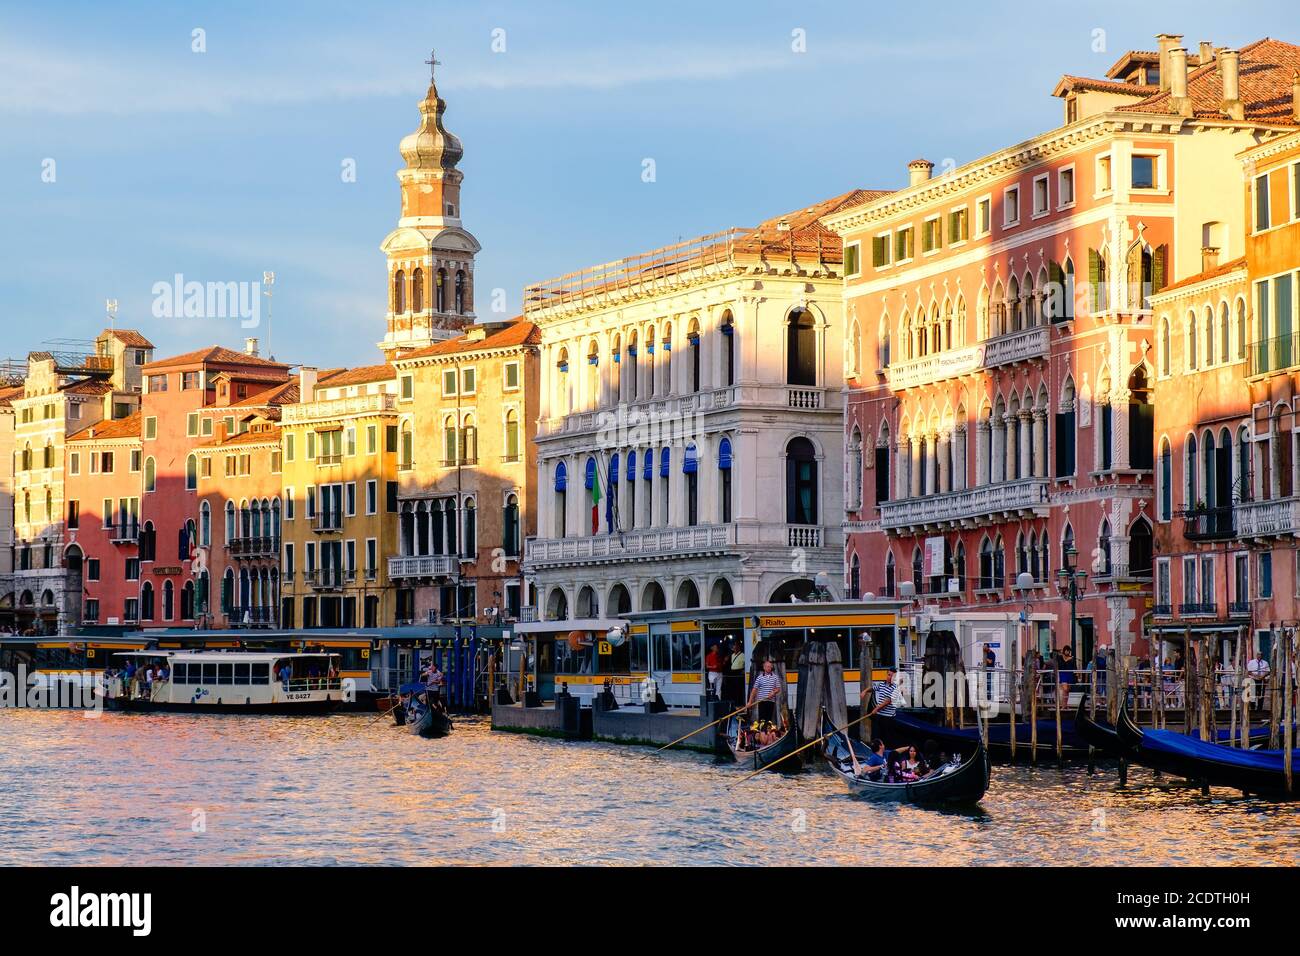 VENICE,ITALY - JULY 25,2017 : Gondolas and vaporetti on the Grand Canal in Venice surrounded by old palaces Stock Photo